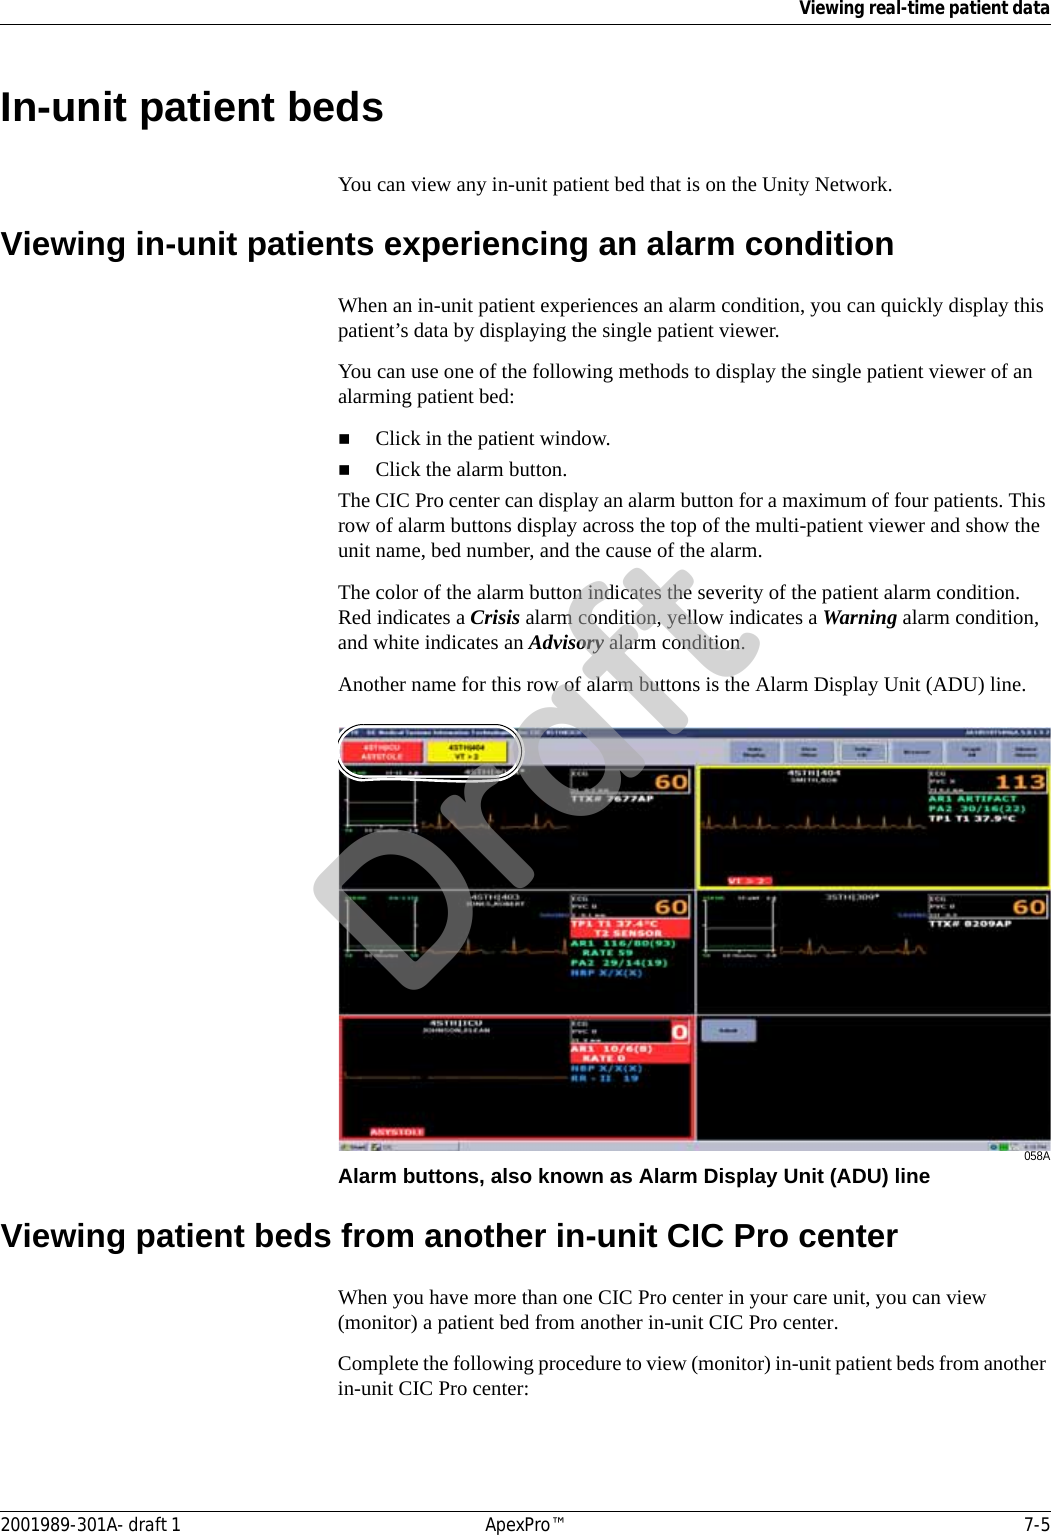 Viewing real-time patient data2001989-301A- draft 1 ApexPro™ 7-5In-unit patient bedsYou can view any in-unit patient bed that is on the Unity Network.Viewing in-unit patients experiencing an alarm conditionWhen an in-unit patient experiences an alarm condition, you can quickly display this patient’s data by displaying the single patient viewer. You can use one of the following methods to display the single patient viewer of an alarming patient bed:Click in the patient window.Click the alarm button.The CIC Pro center can display an alarm button for a maximum of four patients. This row of alarm buttons display across the top of the multi-patient viewer and show the unit name, bed number, and the cause of the alarm. The color of the alarm button indicates the severity of the patient alarm condition. Red indicates a Crisis alarm condition, yellow indicates a Warning alarm condition, and white indicates an Advisory alarm condition.Another name for this row of alarm buttons is the Alarm Display Unit (ADU) line.058AAlarm buttons, also known as Alarm Display Unit (ADU) lineViewing patient beds from another in-unit CIC Pro centerWhen you have more than one CIC Pro center in your care unit, you can view (monitor) a patient bed from another in-unit CIC Pro center.Complete the following procedure to view (monitor) in-unit patient beds from another in-unit CIC Pro center:Draft